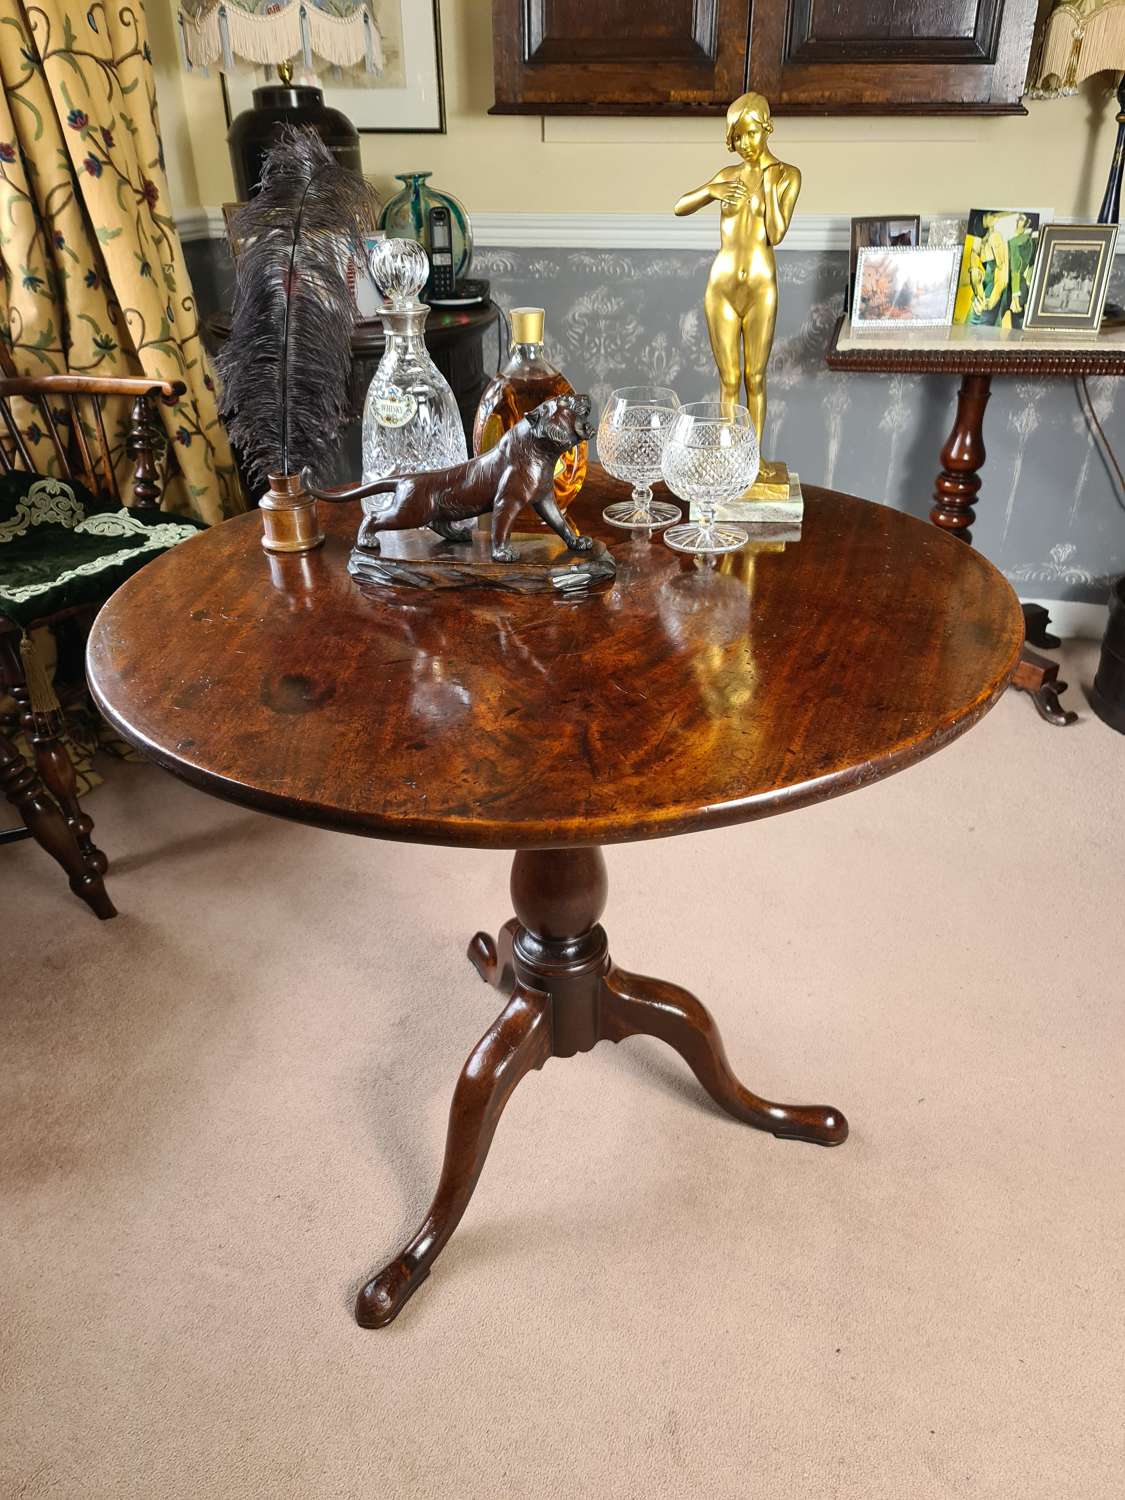 Exhibition Quality Mahogany Tip-Up Table c.1760